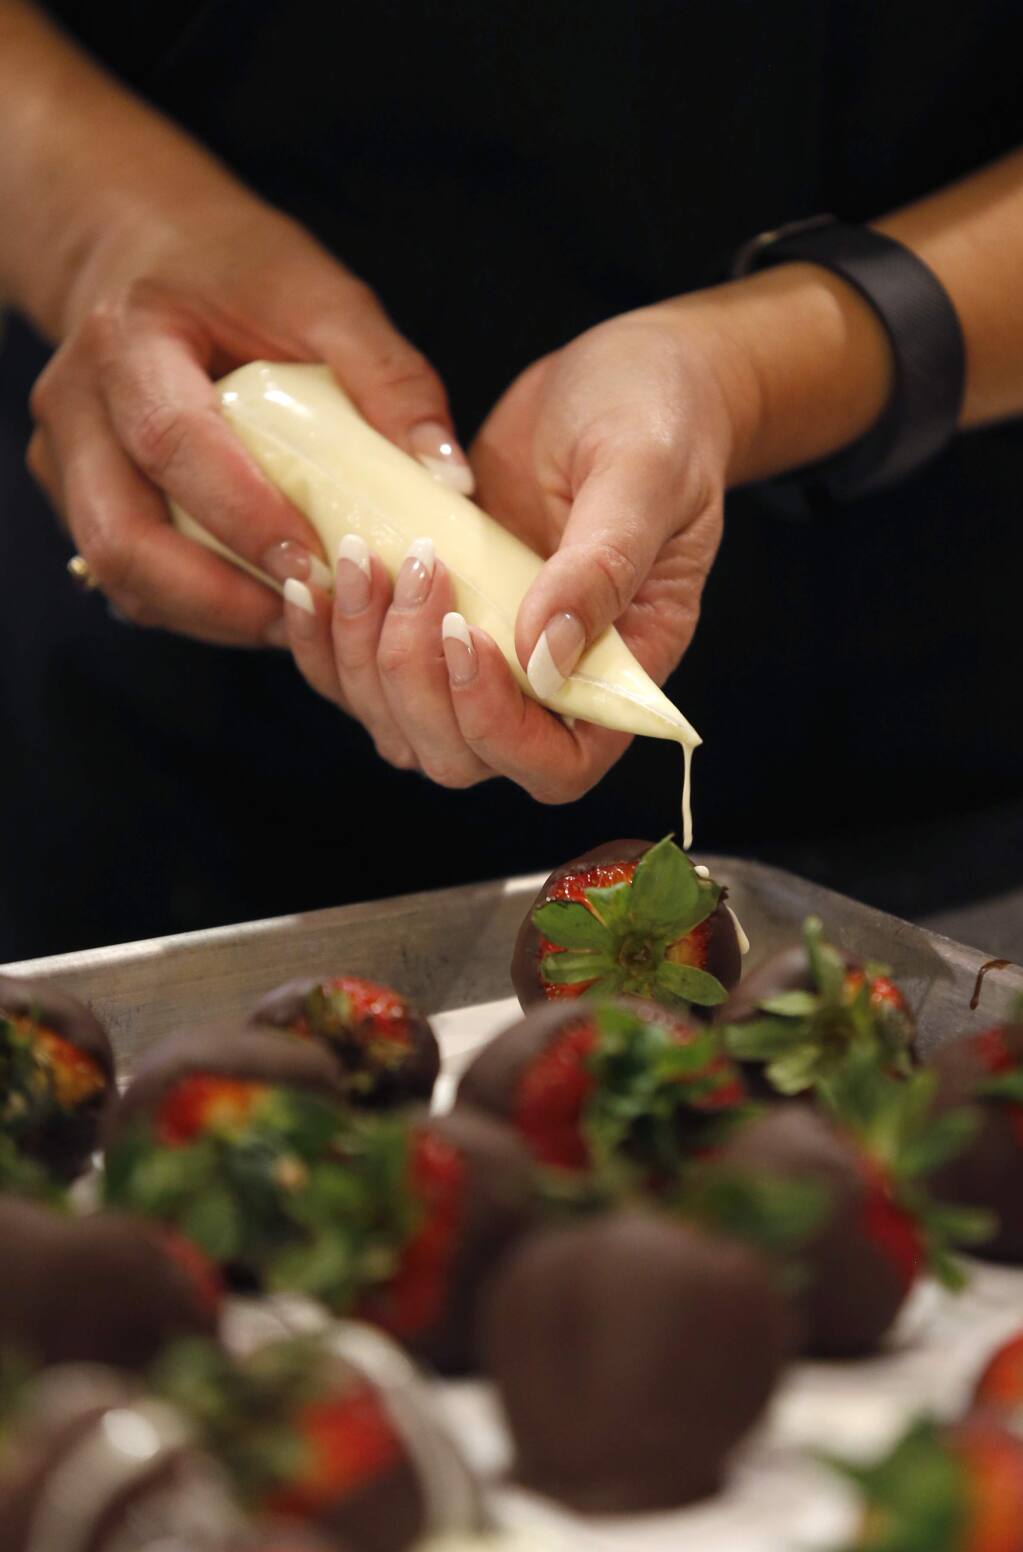 White chocolate is drizzled over chocolate covered strawberries during a spring brunch class at Ramekins on Sunday, April 17, 2016 in Sonoma, California. (BETH SCHLANKER/ The Press Democrat)